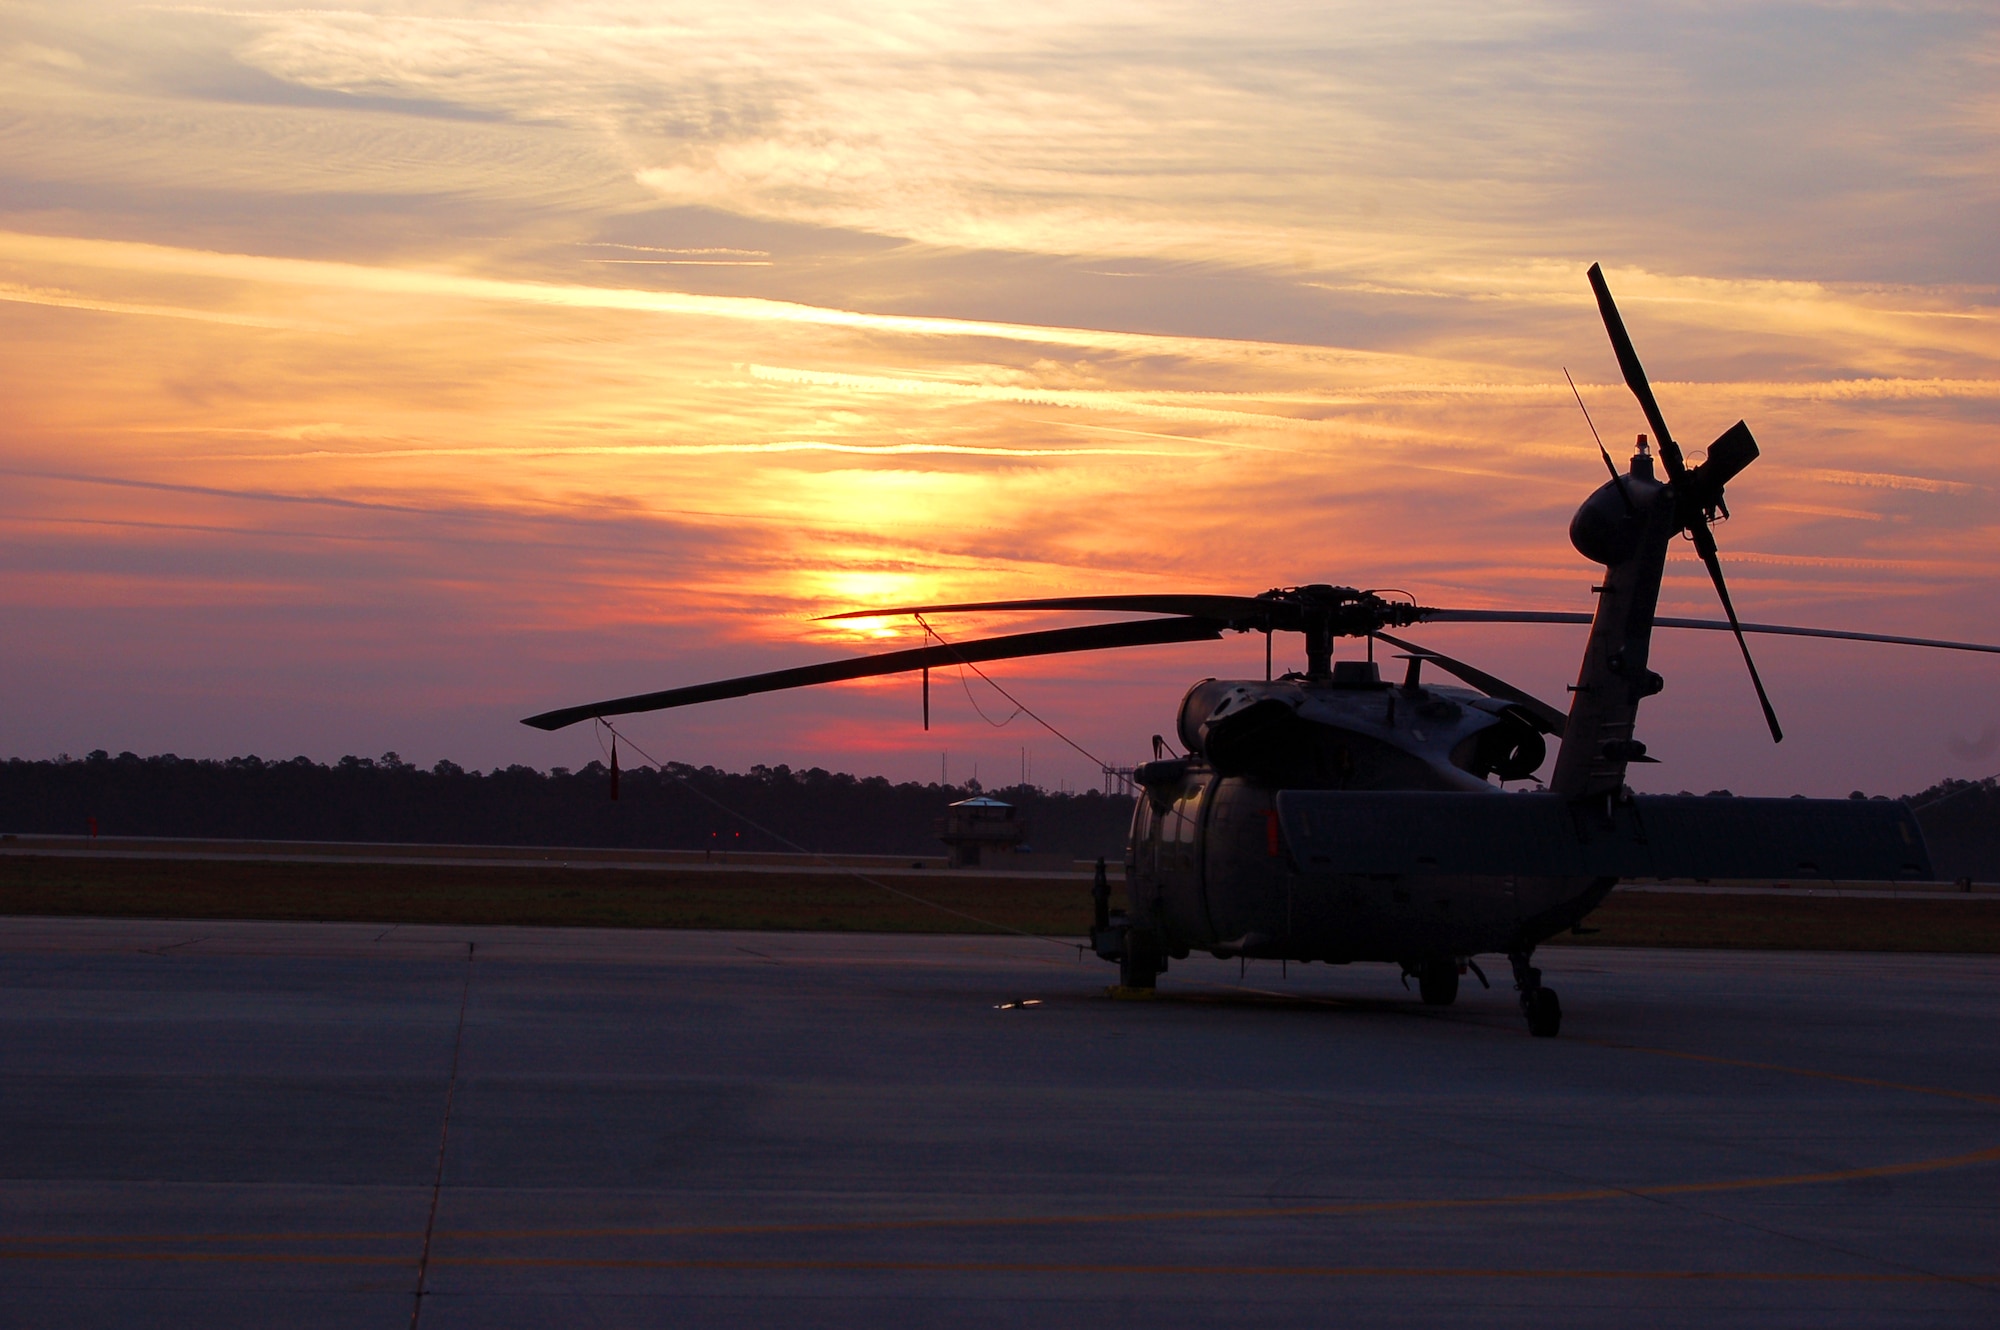 MOODY AIR FORCE BASE, Ga. -- An HH-60G Pave Hawk assiged to the 41st Rescue Squadron awaits another flying day March 12. (U.S. Air Force photo by Tech. Sgt. Parker Gyokeres)